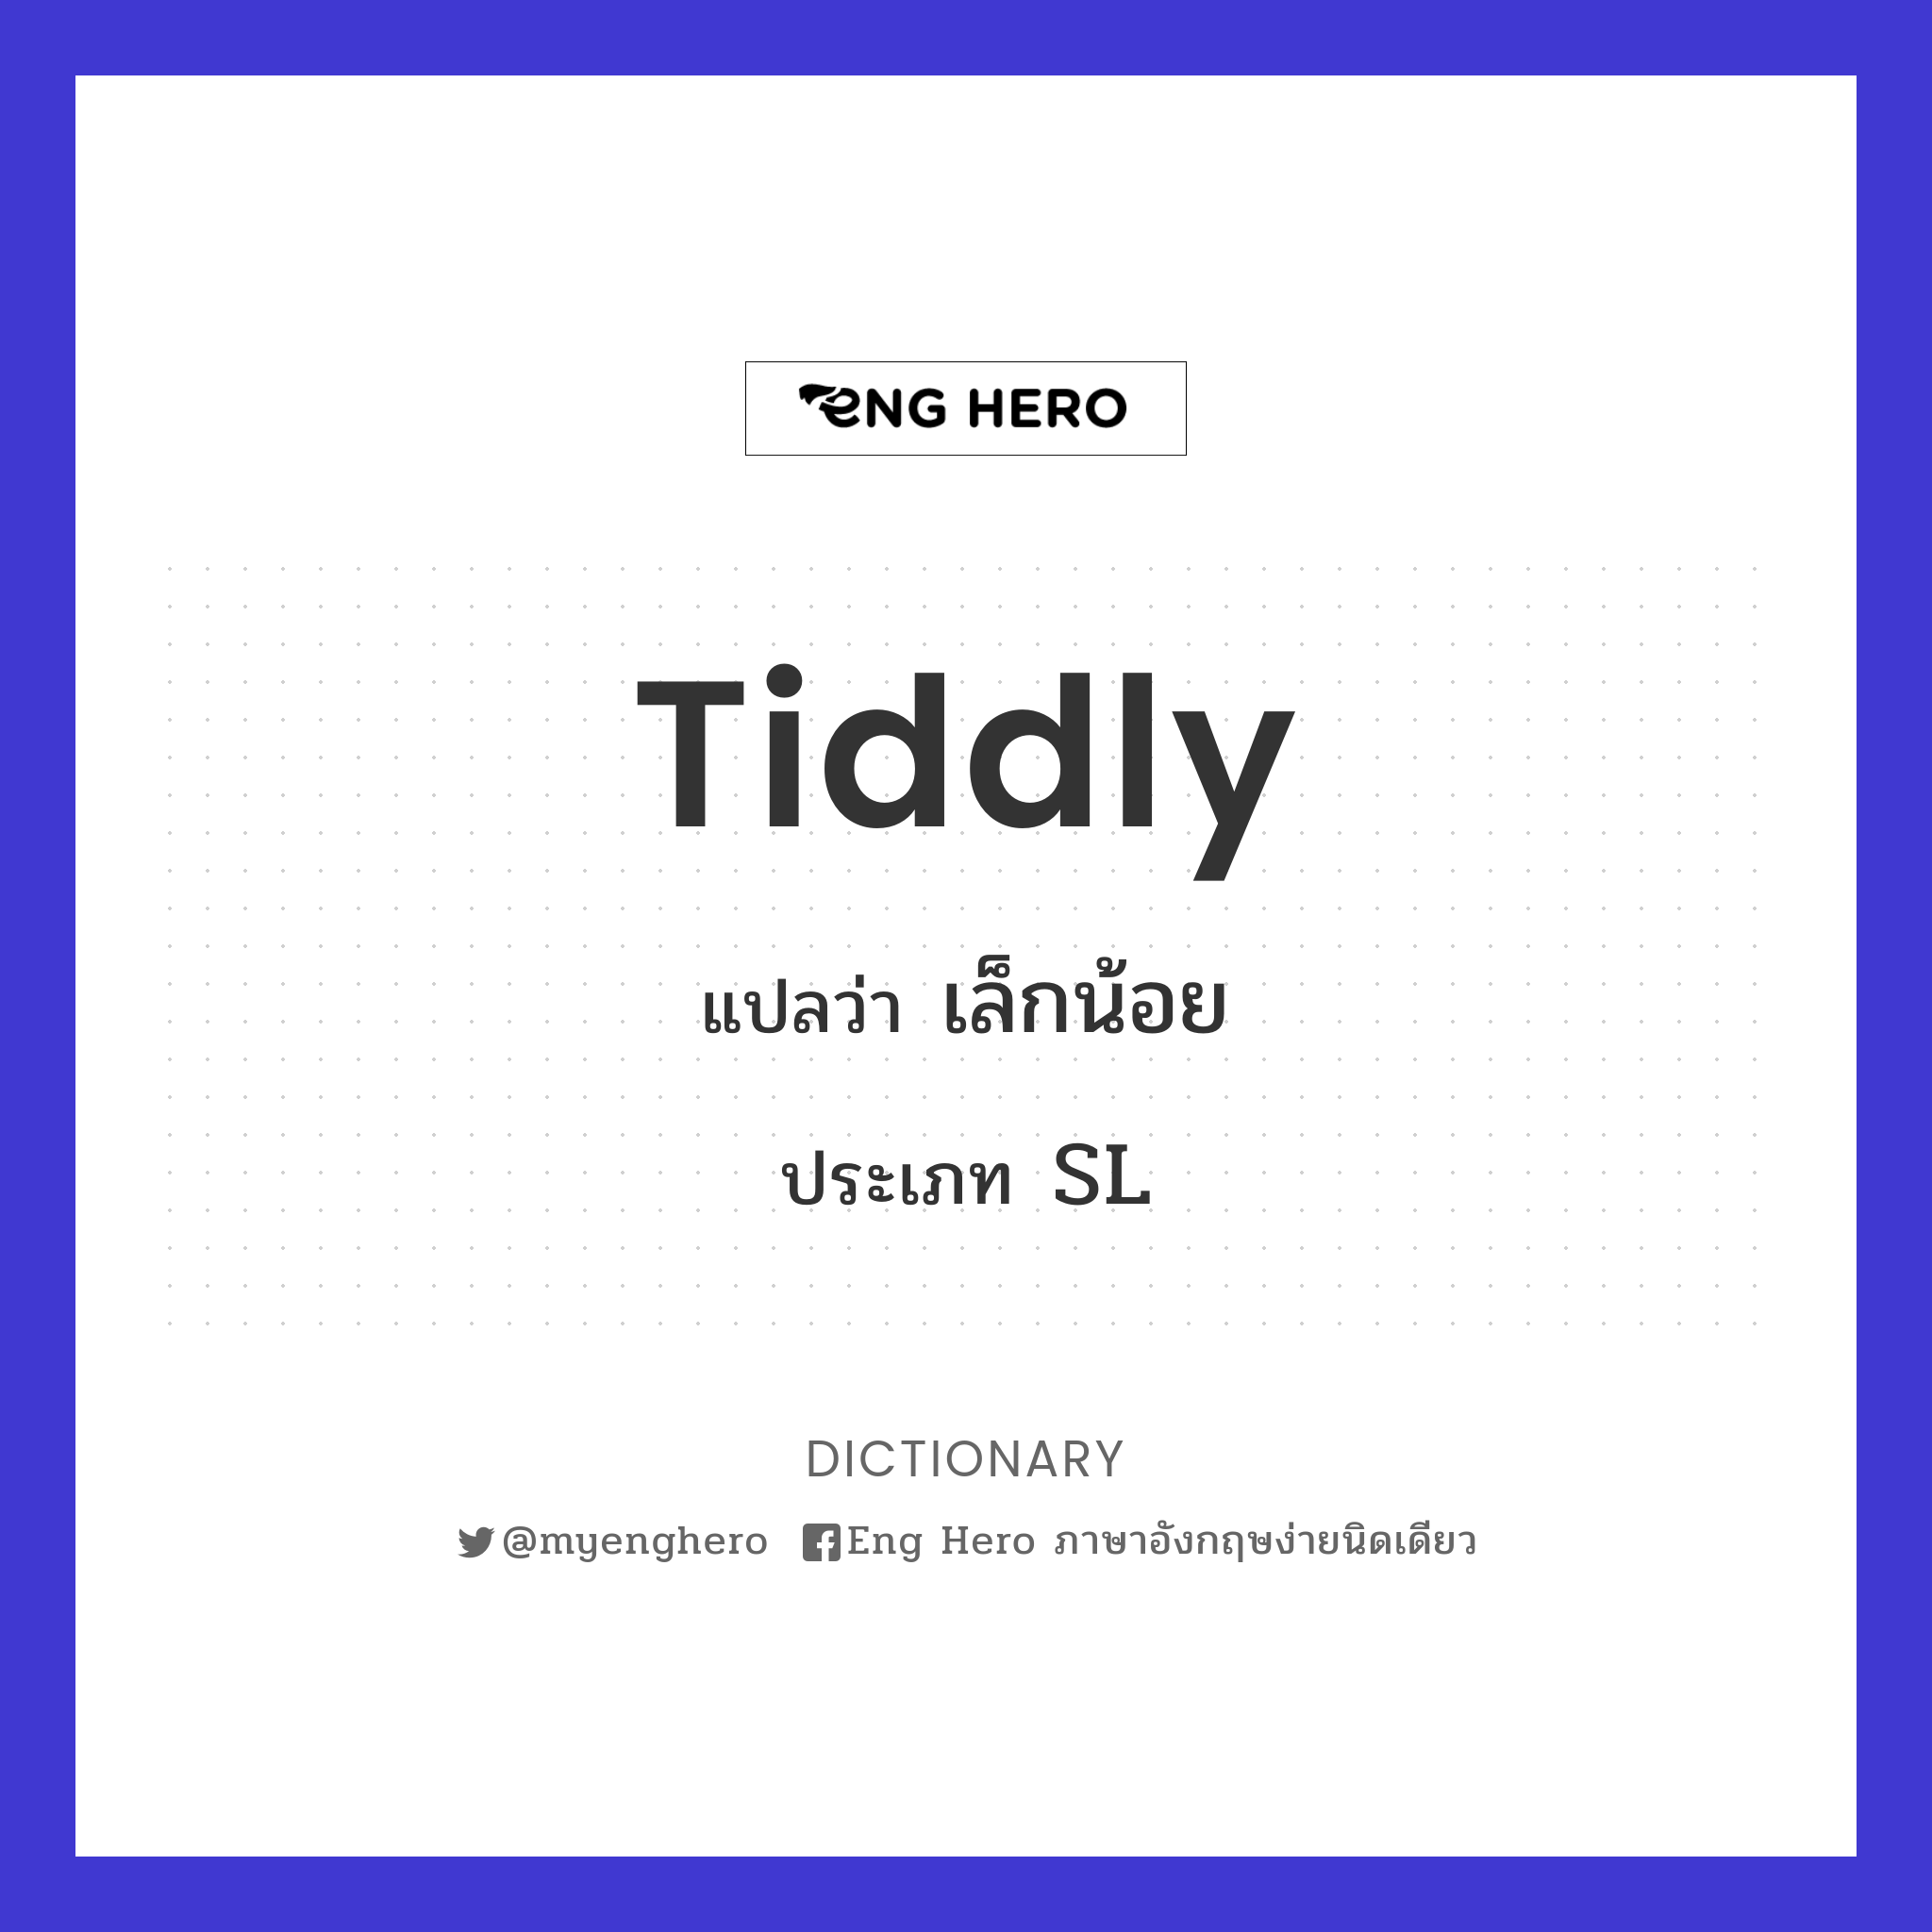 tiddly